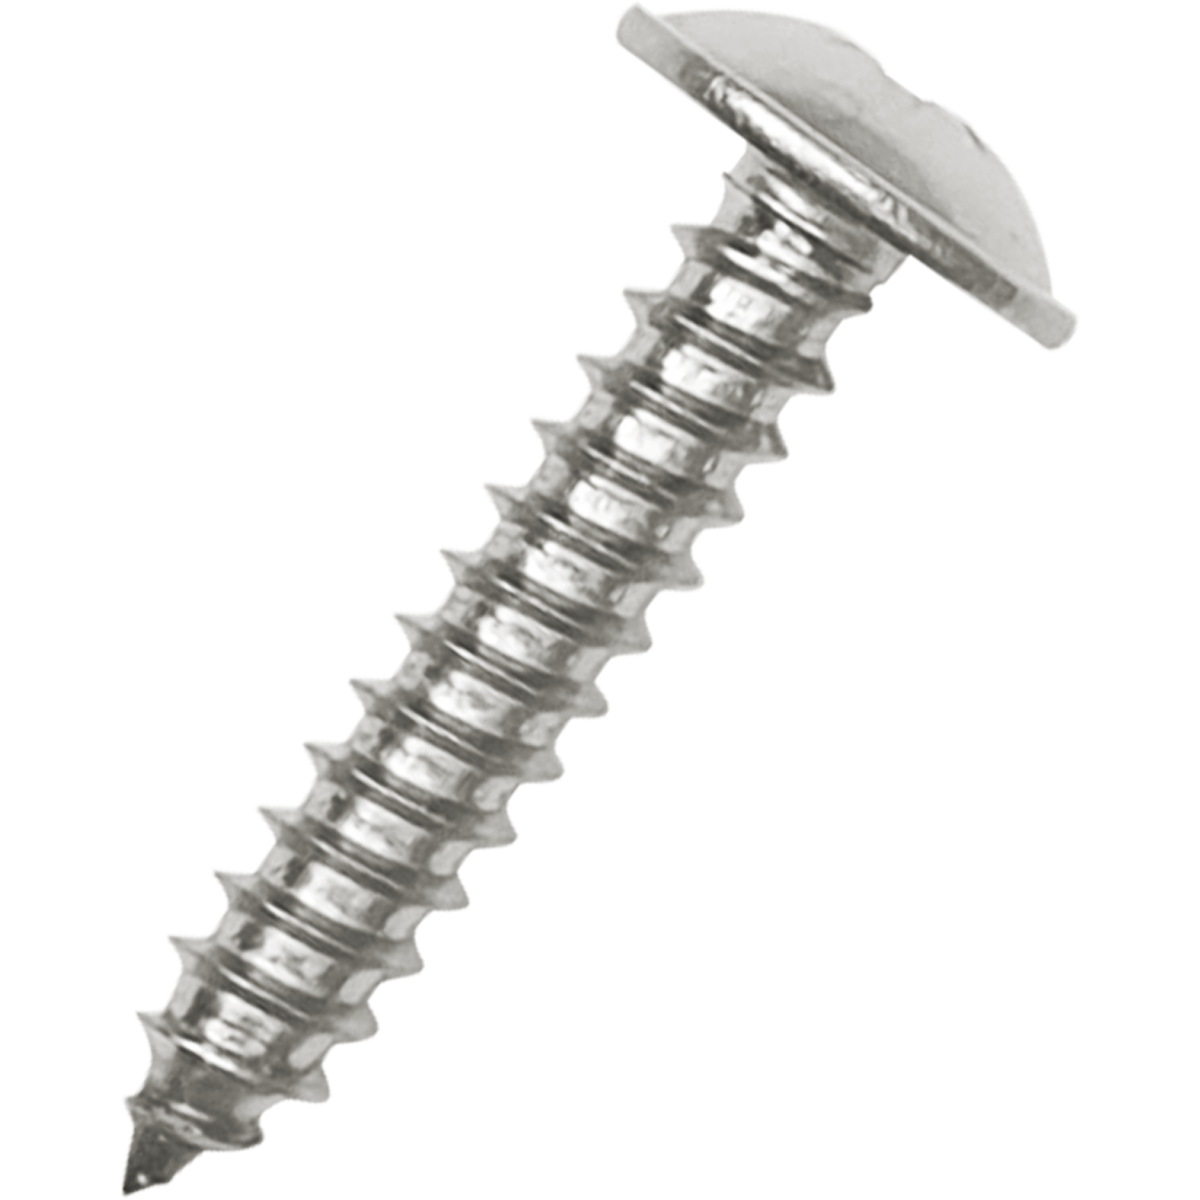 Flange head self-tapping screws available in a variety of sizes 